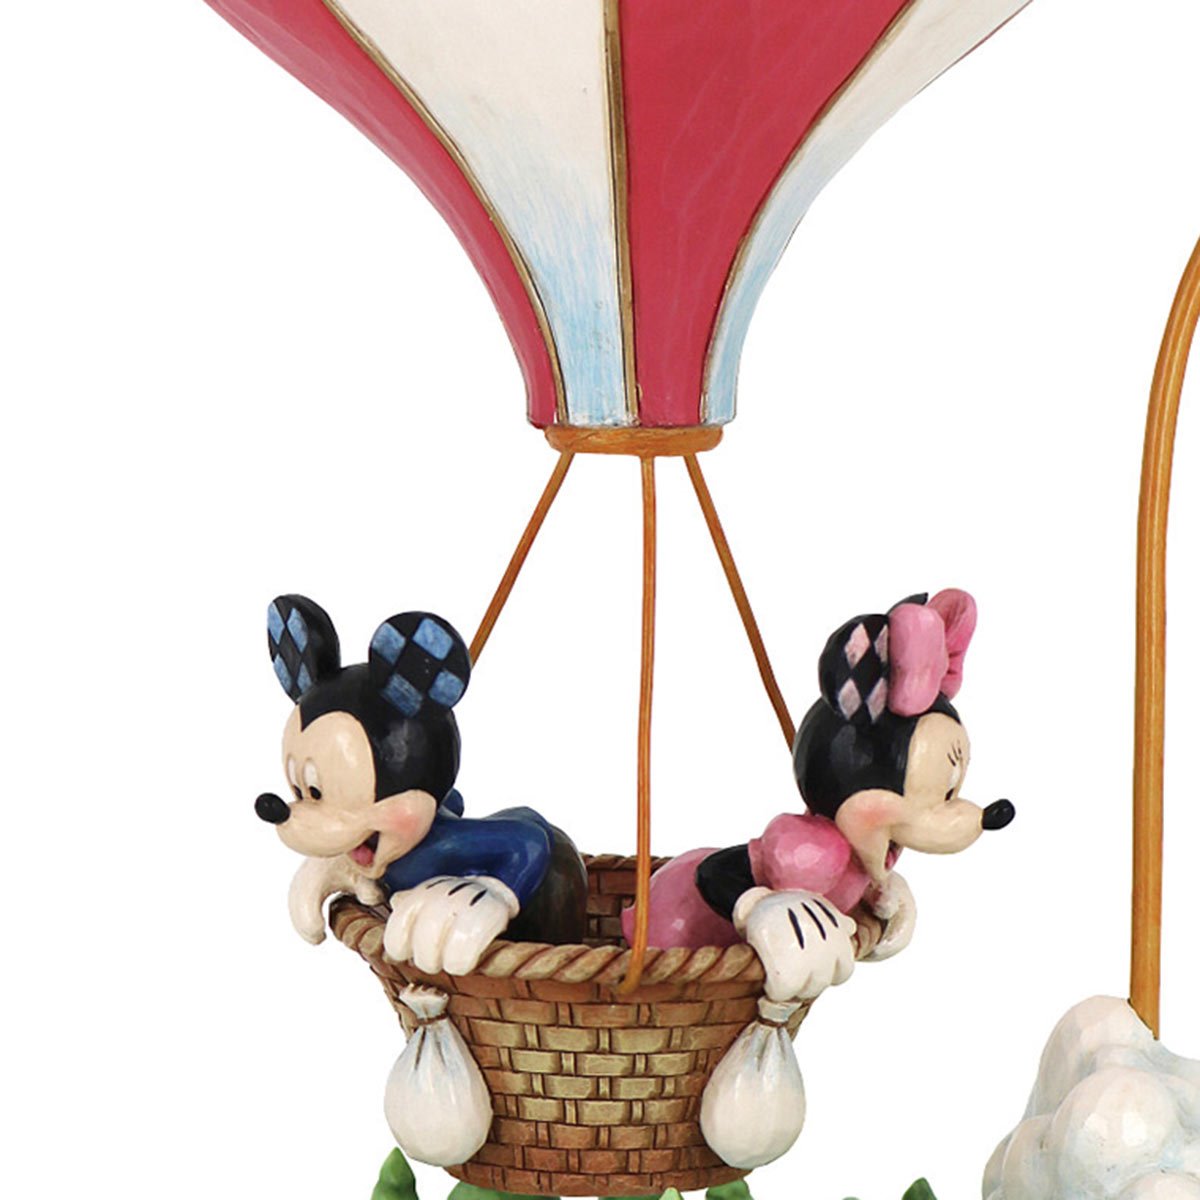  Enesco Disney Traditions by Jim Shore Mickey and